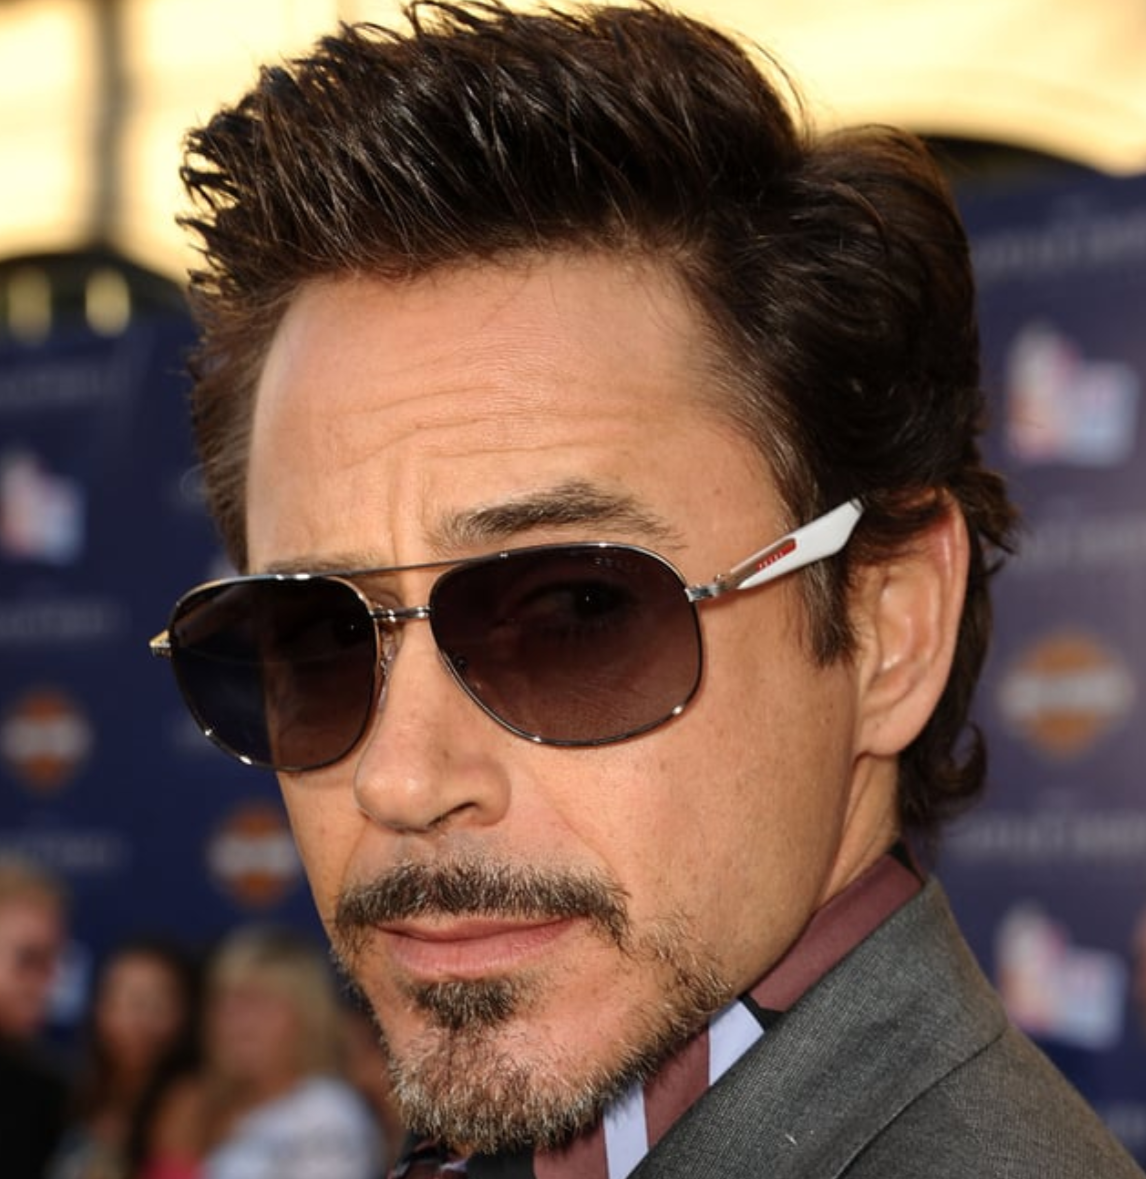 Can't find Tony Stark's sunglasses from Iron Man 3 | Page 113 | RPF Costume  and Prop Maker Community